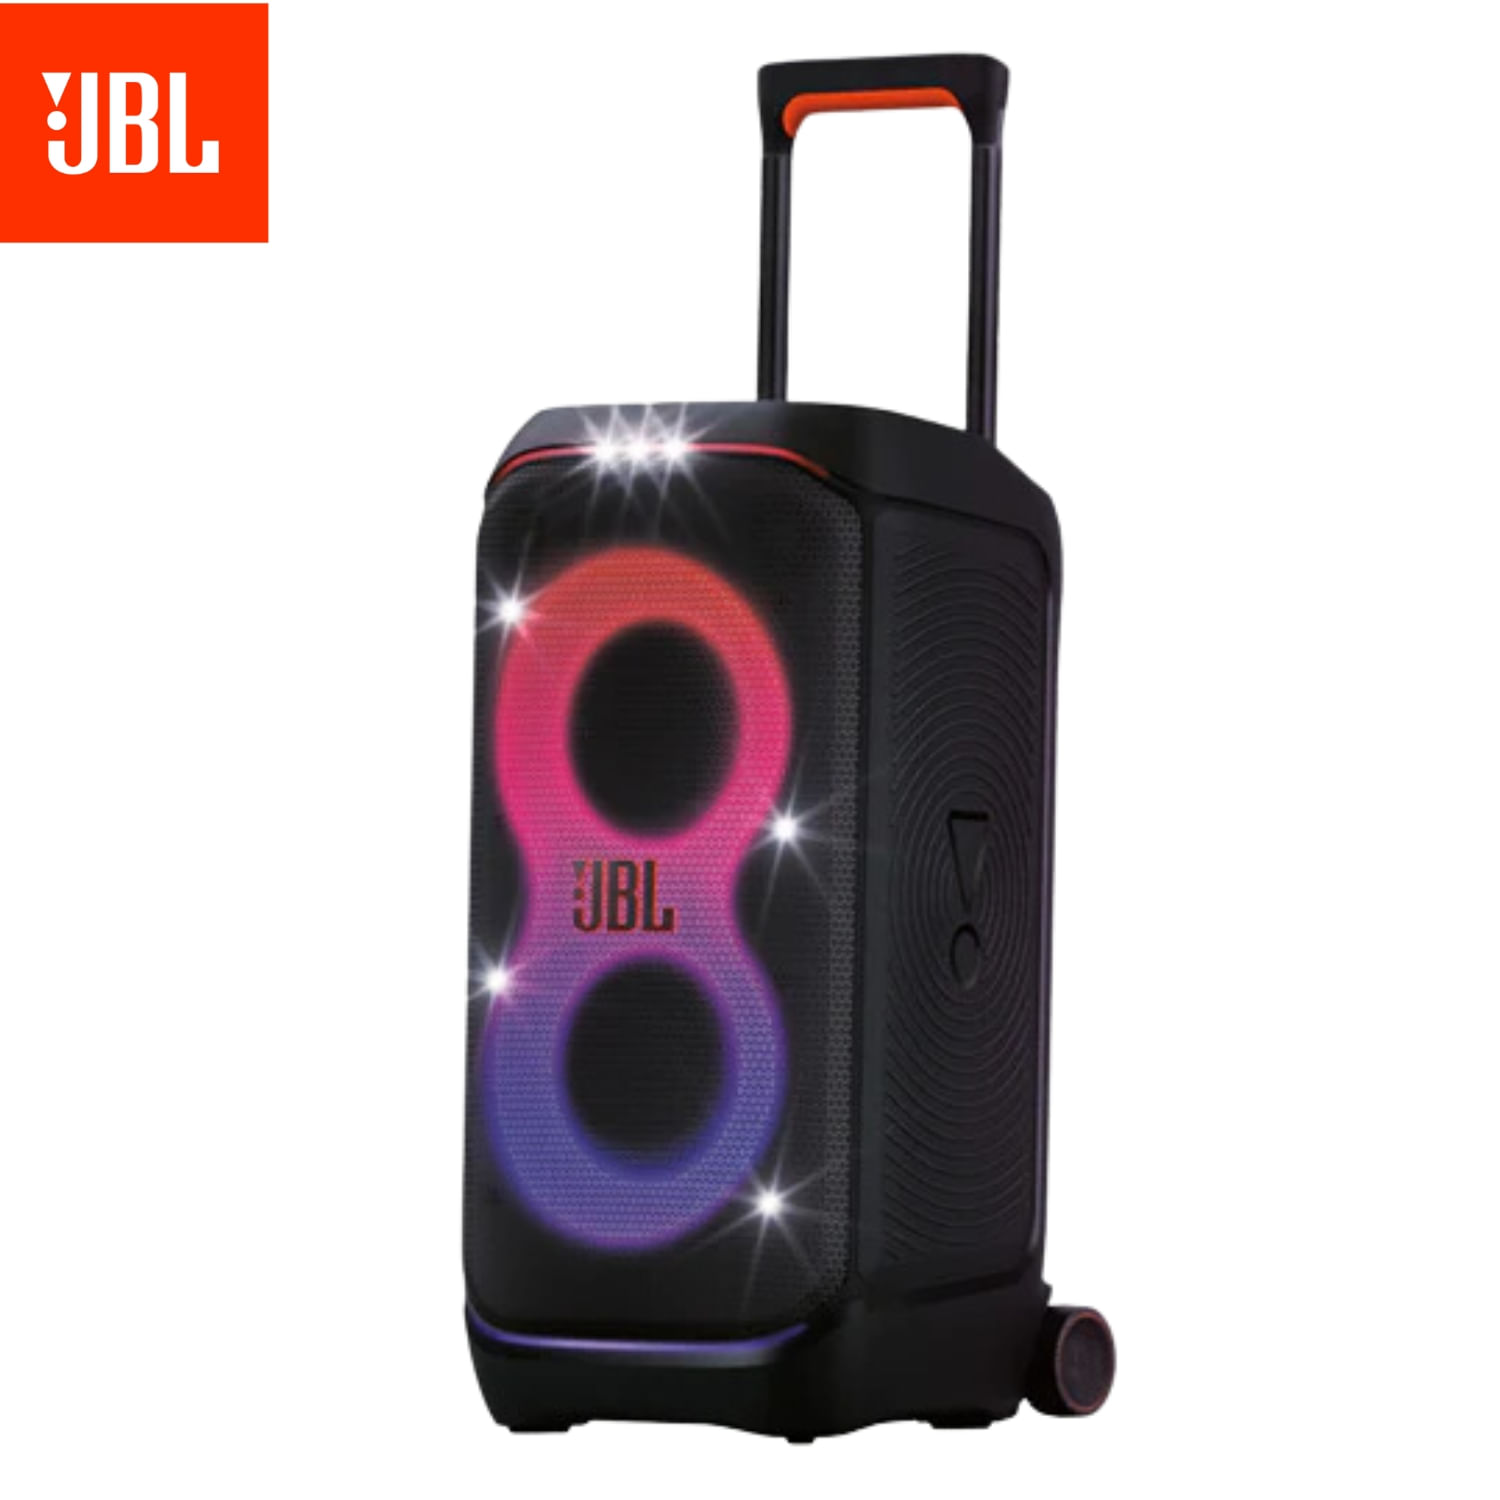 Parlante JBL PartyBox Stage 320 Bluetooth IPX4